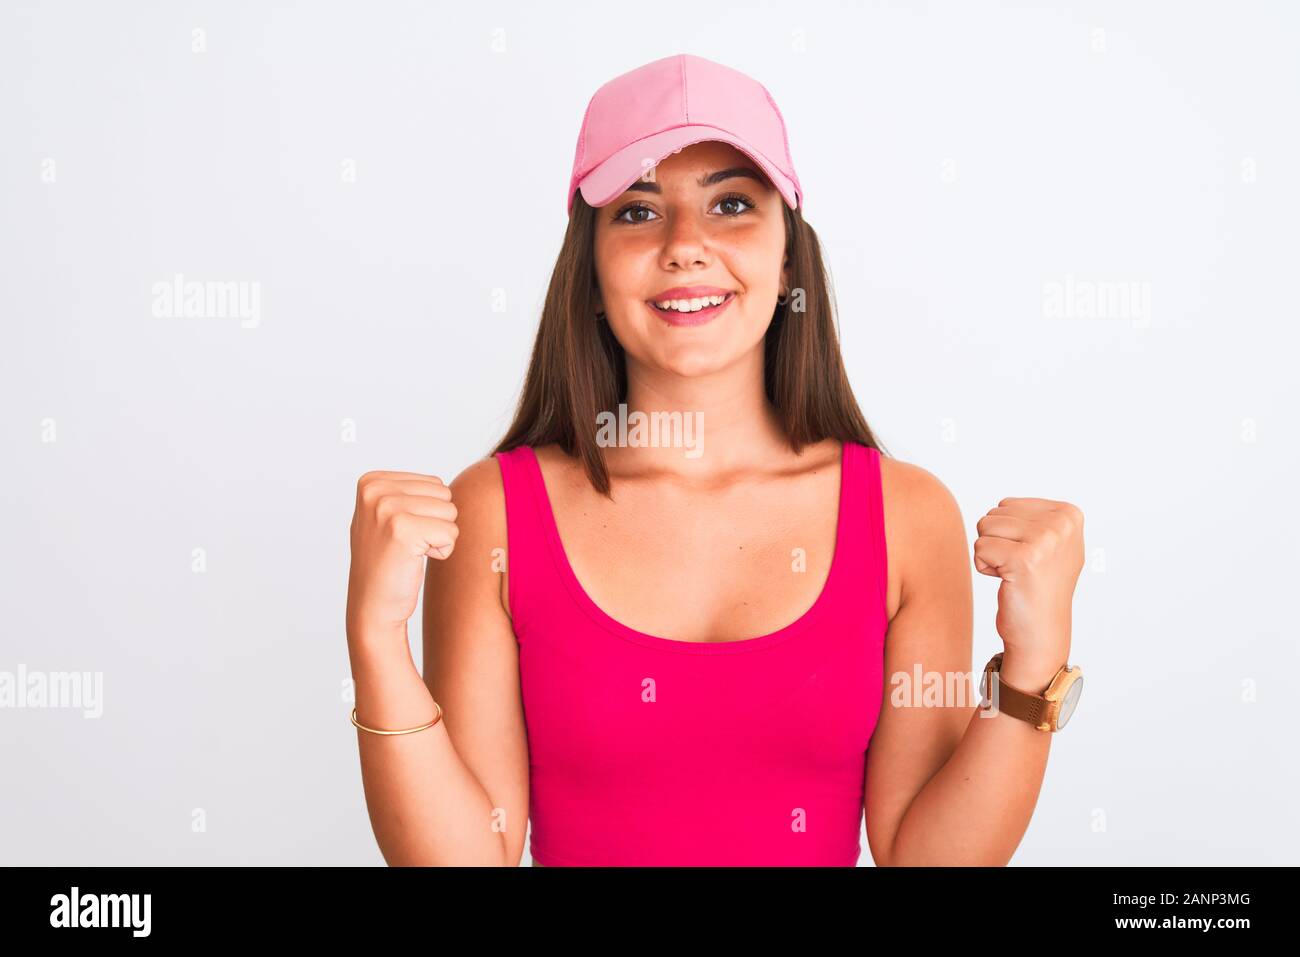 Young beautiful girl wearing pink casual t-shirt and cap over isolated white background celebrating surprised and amazed for success with arms raised Stock Photo